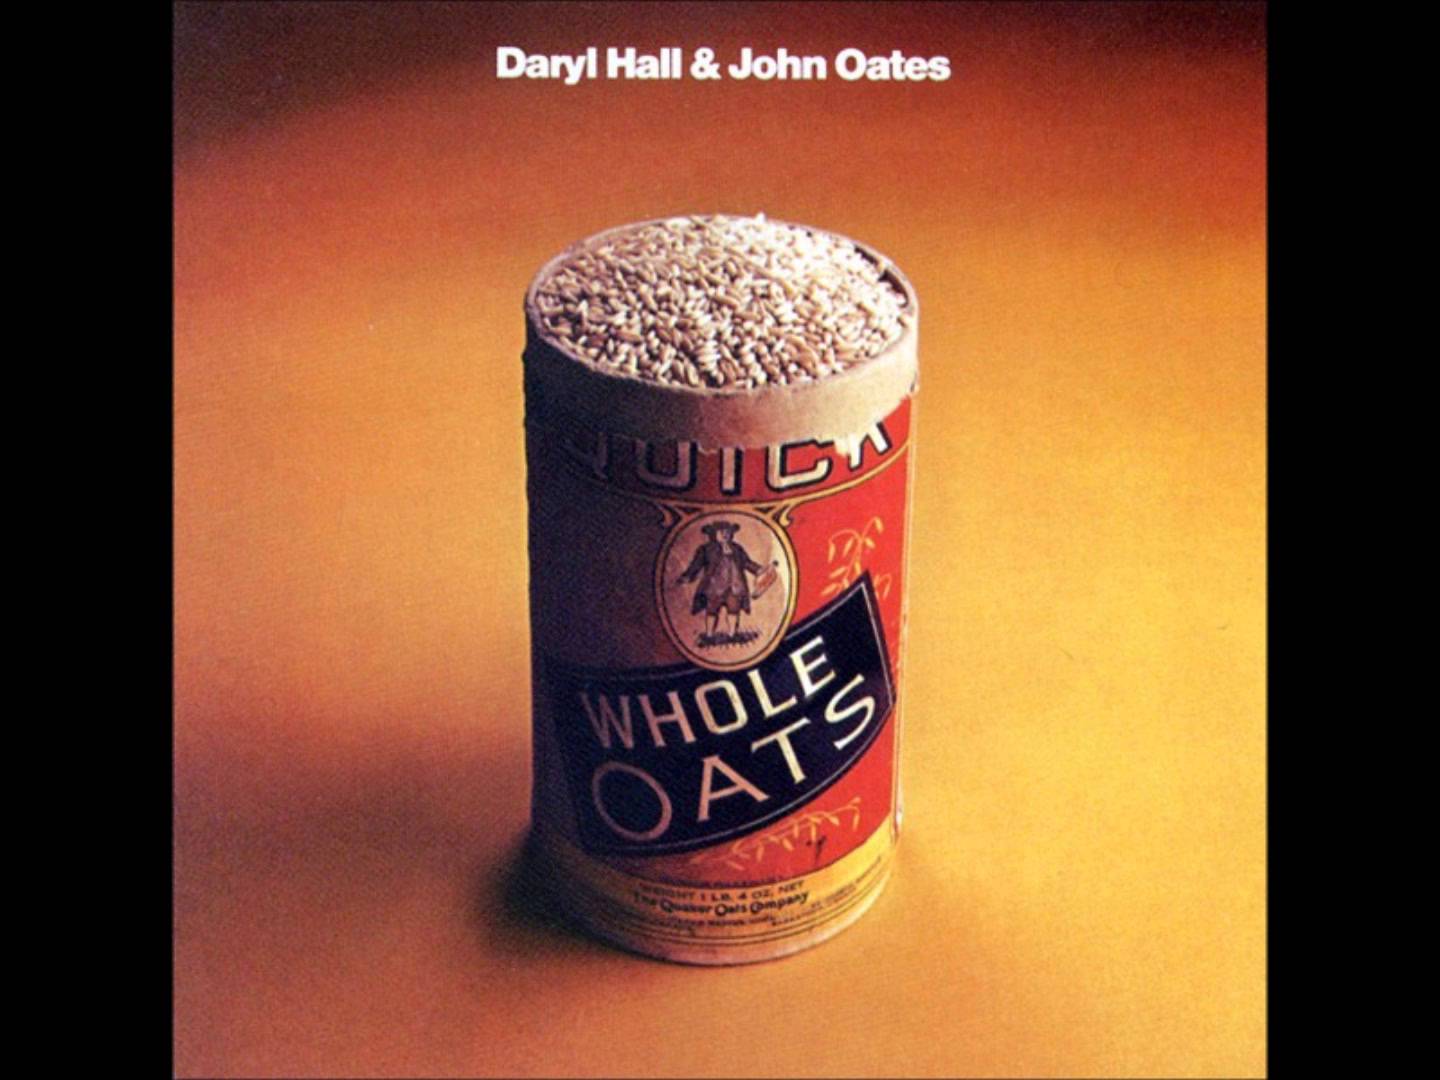 Please Enjoy this trip down memory lane and enjoy the uncomfortable gayness of Hall and Oates